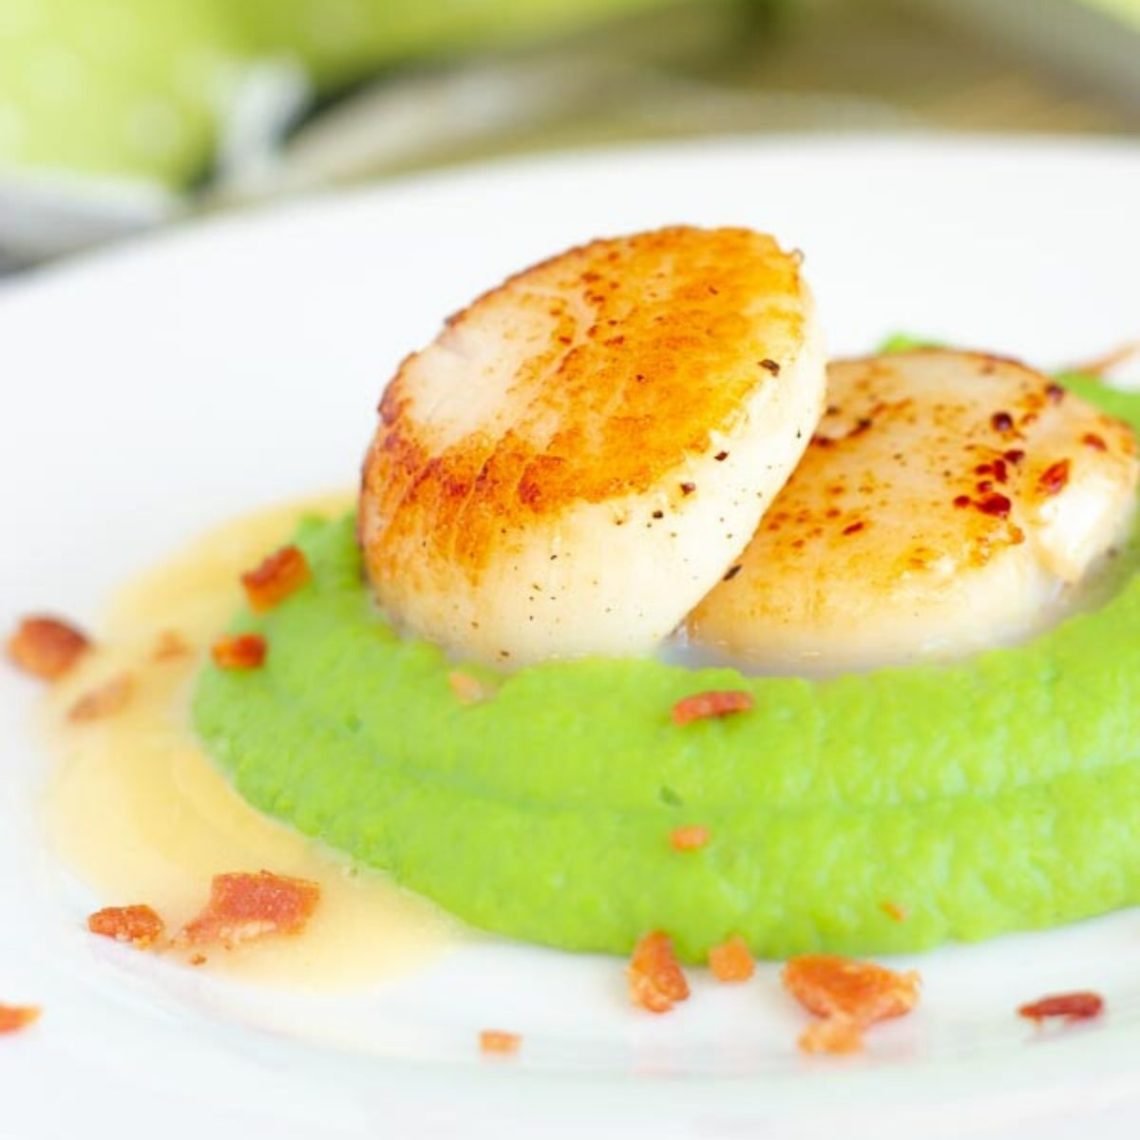 side view of pan seared scallops served on pea puree drizzled with beurre blanc